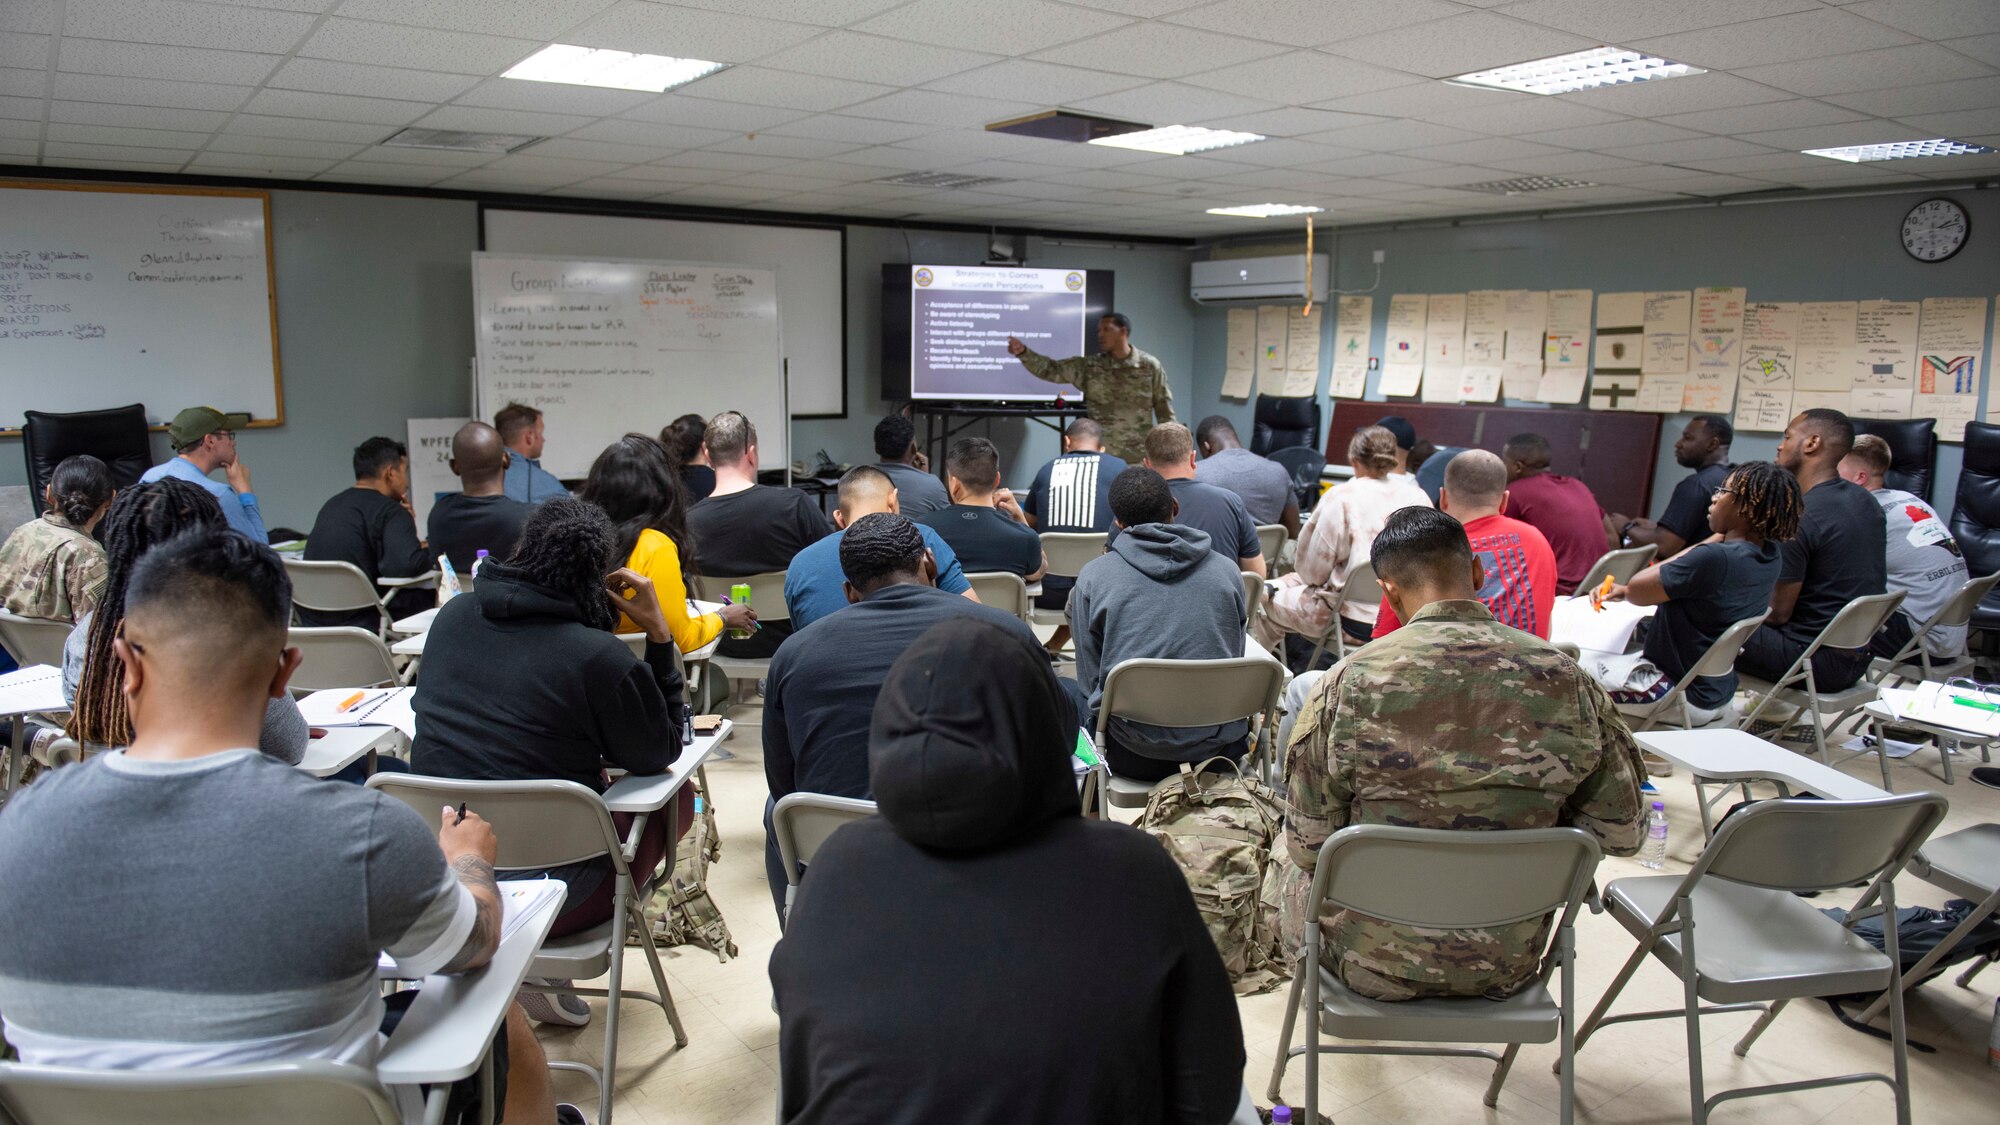 U.S. Air Force Tech. Sgt. Malcolm Bentley, 386th Air Expeditionary Wing equal opportunity director, calls on a student during a U.S. Army EO leaders course at Camp Buehring, Kuwait, November 9, 2021. Bentley was an Air Force EO invited to help instruct this course.  (U.S. Air Force photo by Staff Sgt. Ryan Brooks)